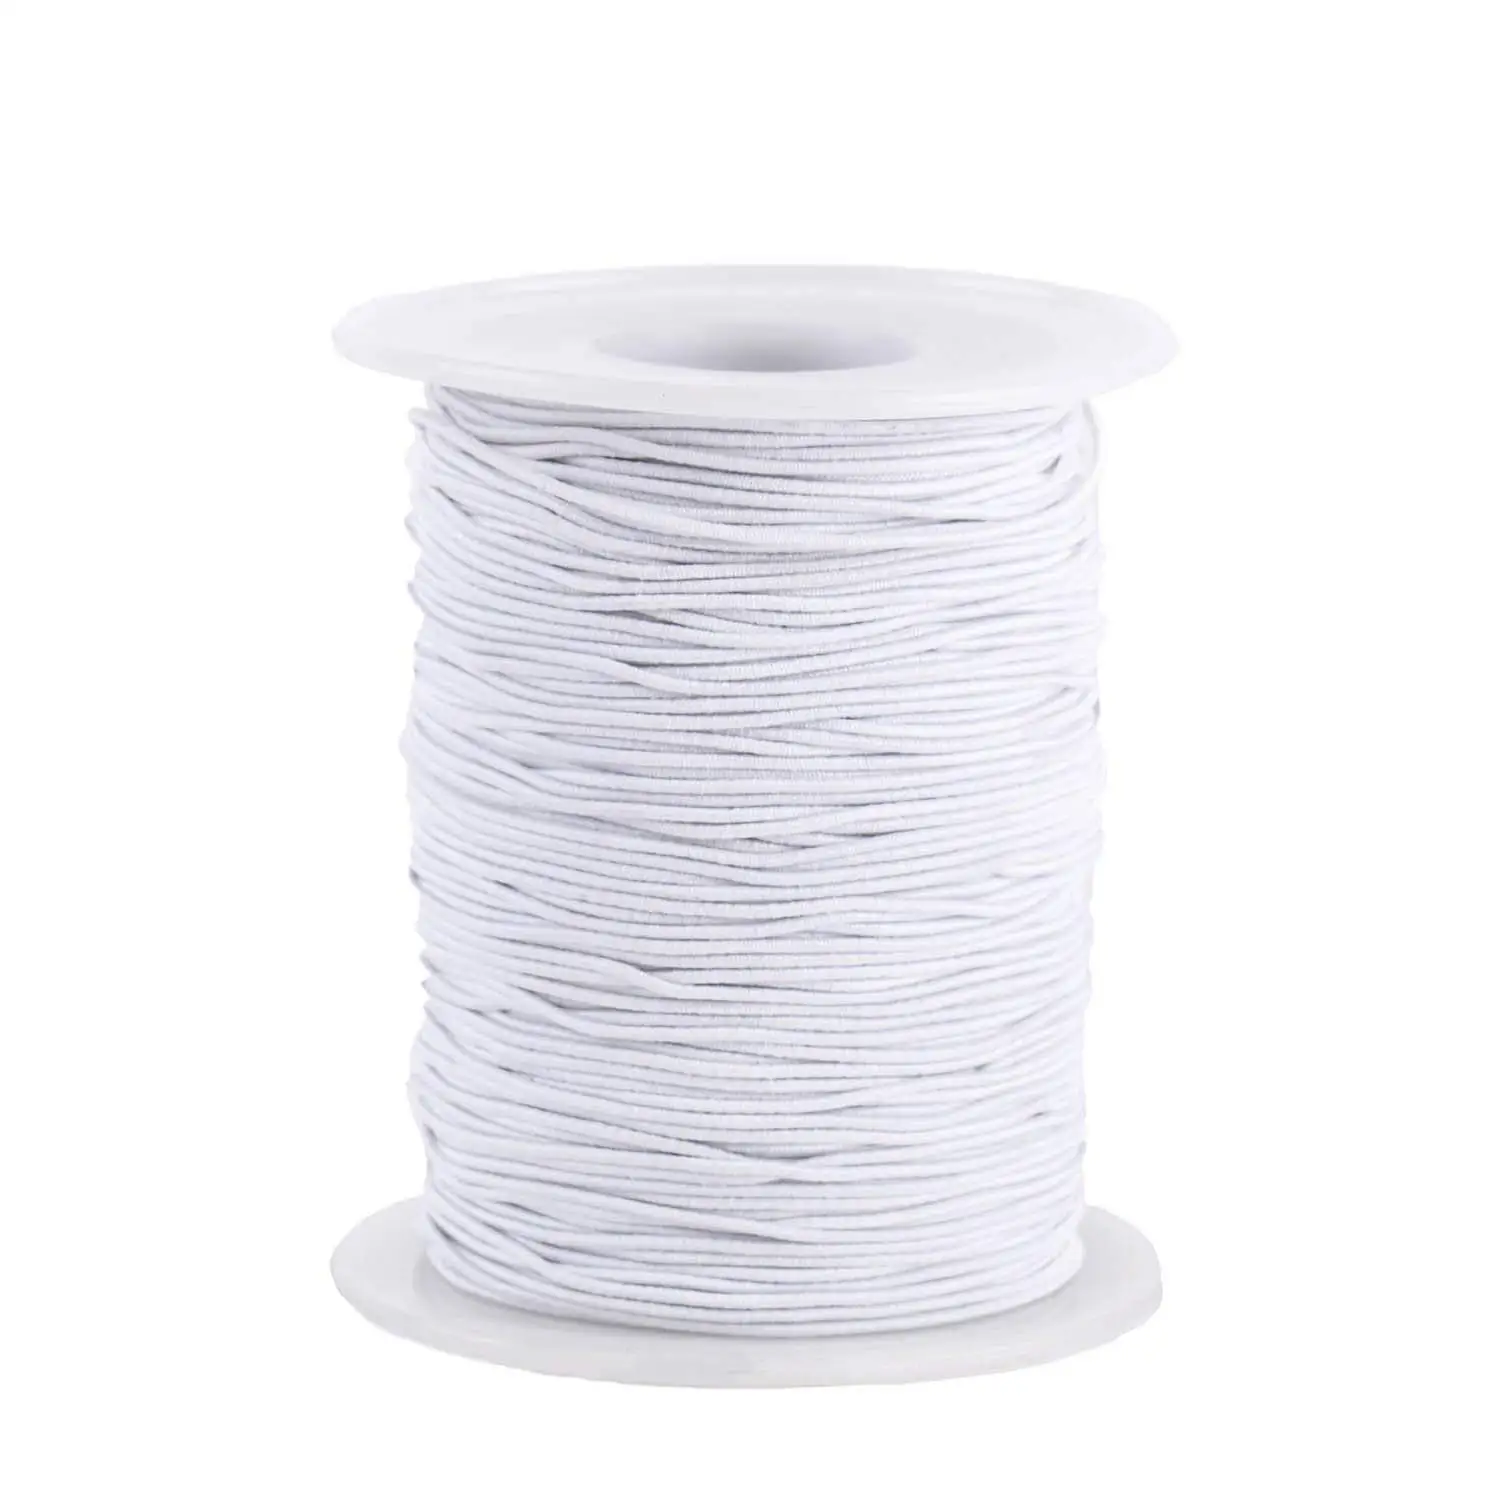 BENECREAT 1mm 109 Yard Elastic Cord Stretch Thread Wire Fabric Crafting String Rope Bungee Cord for DIY Crafts Bracelets Necklaces White Jewelry Making Beading Cord